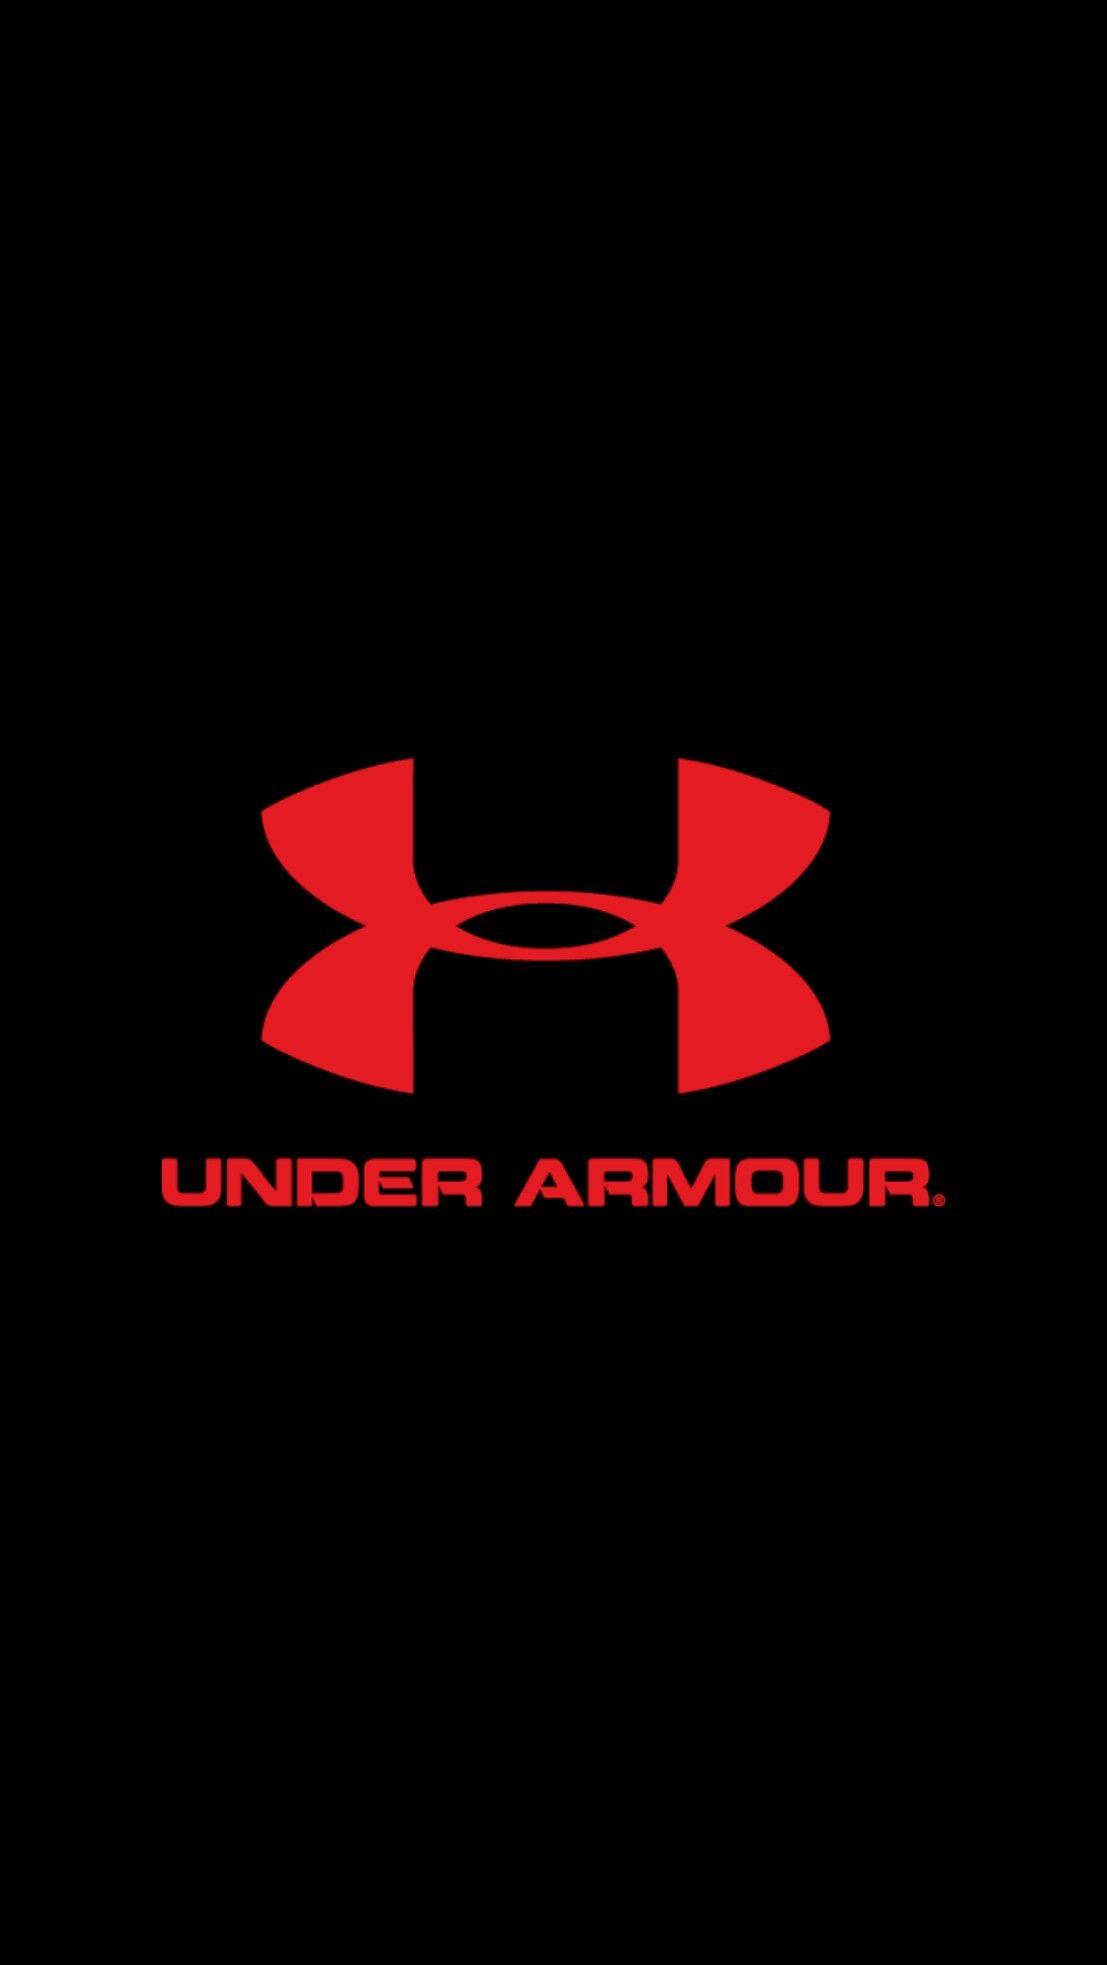 Red Under Armour Logo - underarmour #dbz #naruto #university #iphone wallpaper #android ...